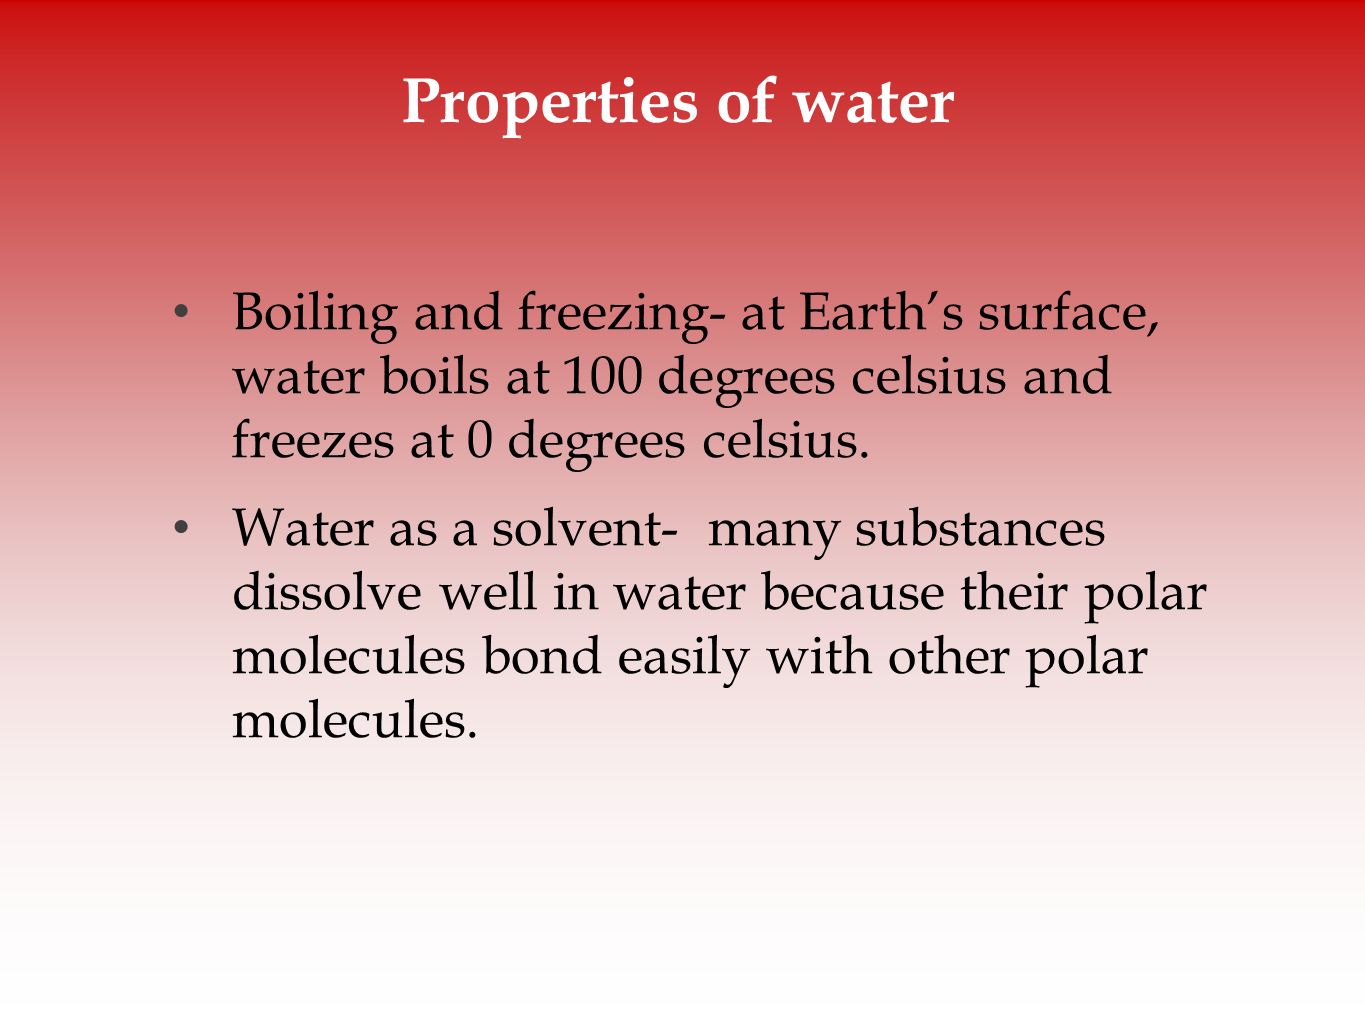 Properties of water Boiling and freezing- at Earth’s surface, water boils at 100 degrees celsius and freezes at 0 degrees celsius.